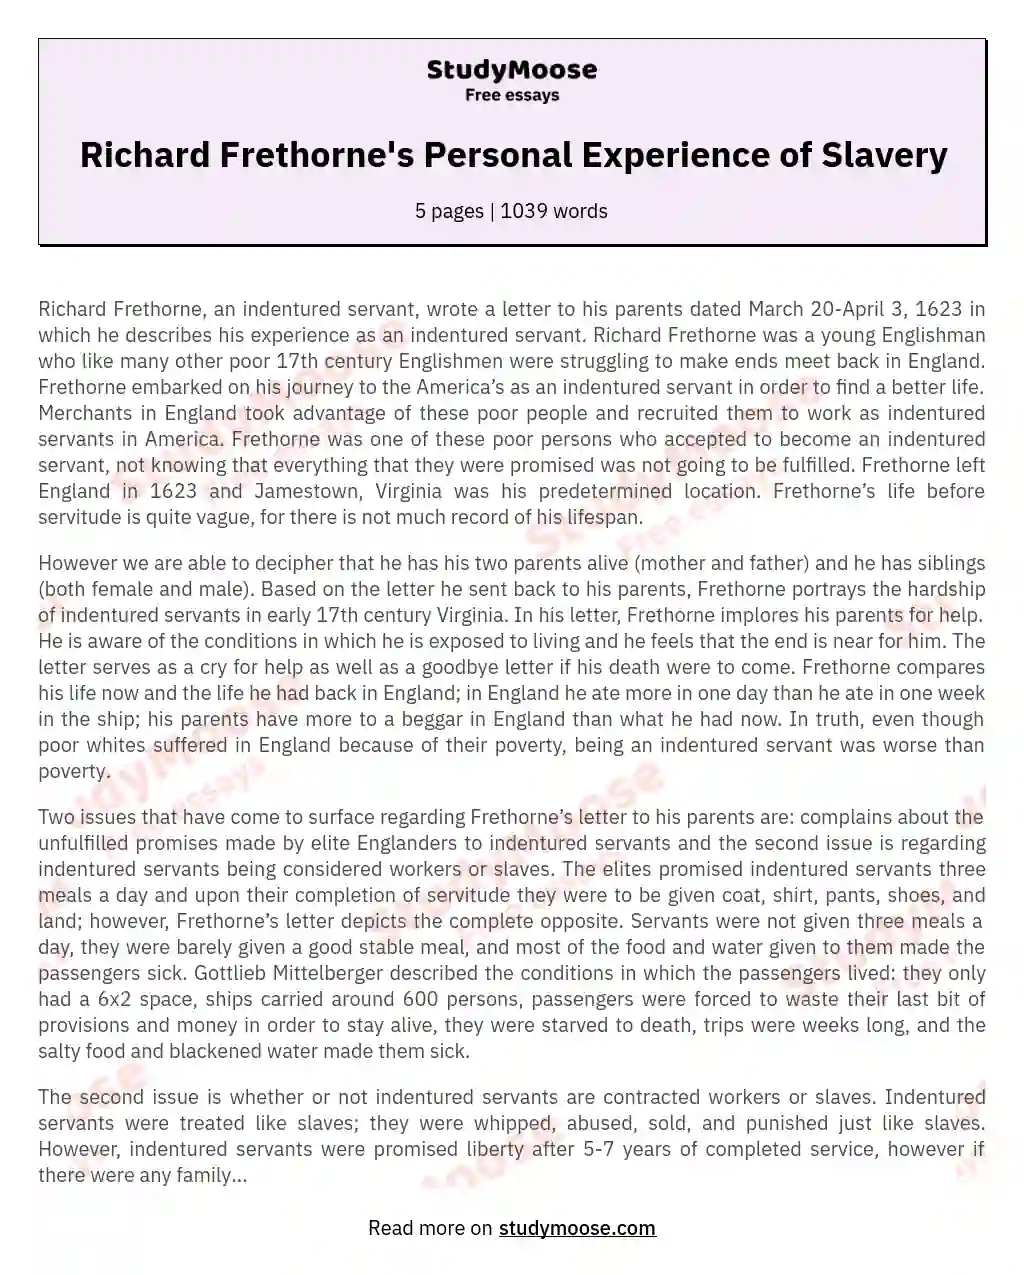 Richard Frethorne's Personal Experience of Slavery